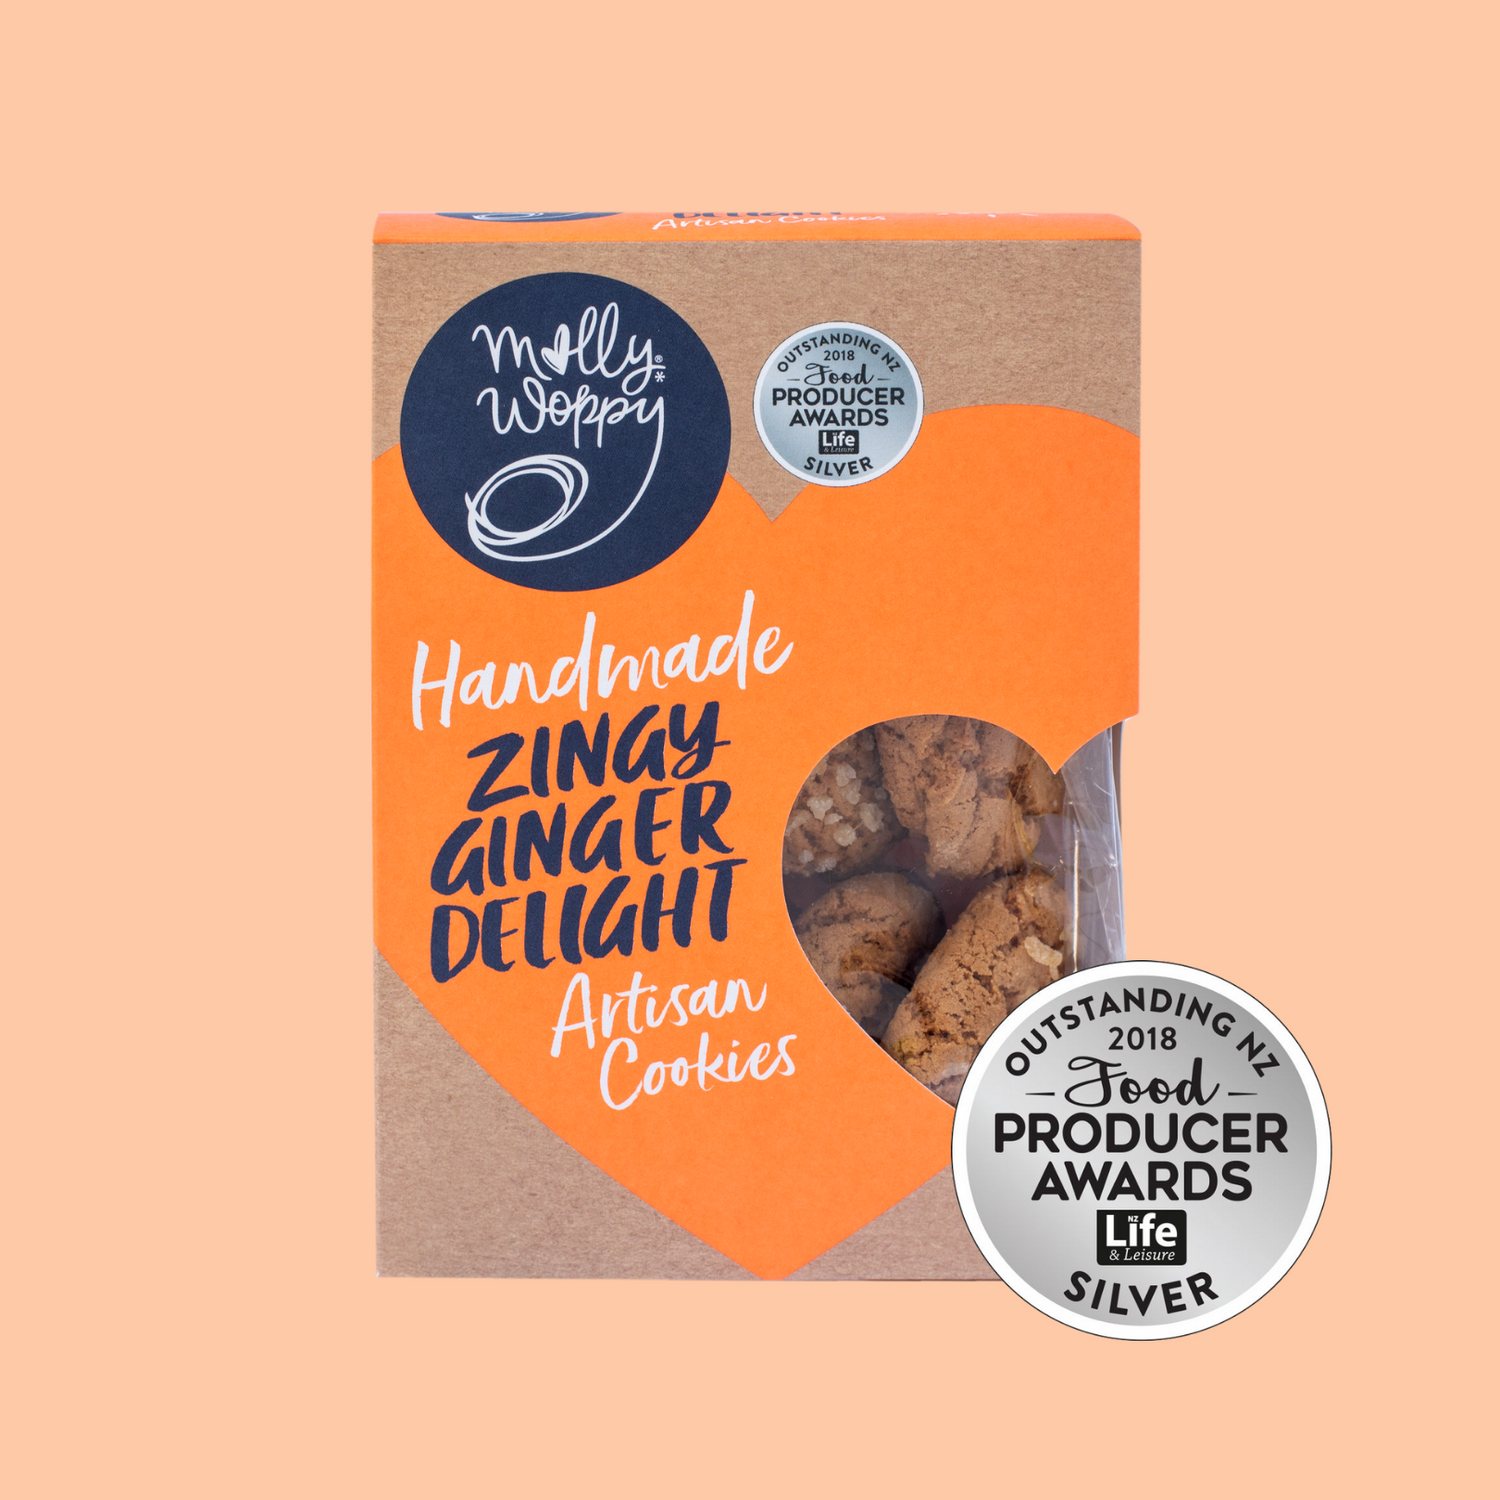 Molly Woppy Zingy Ginger Cookies